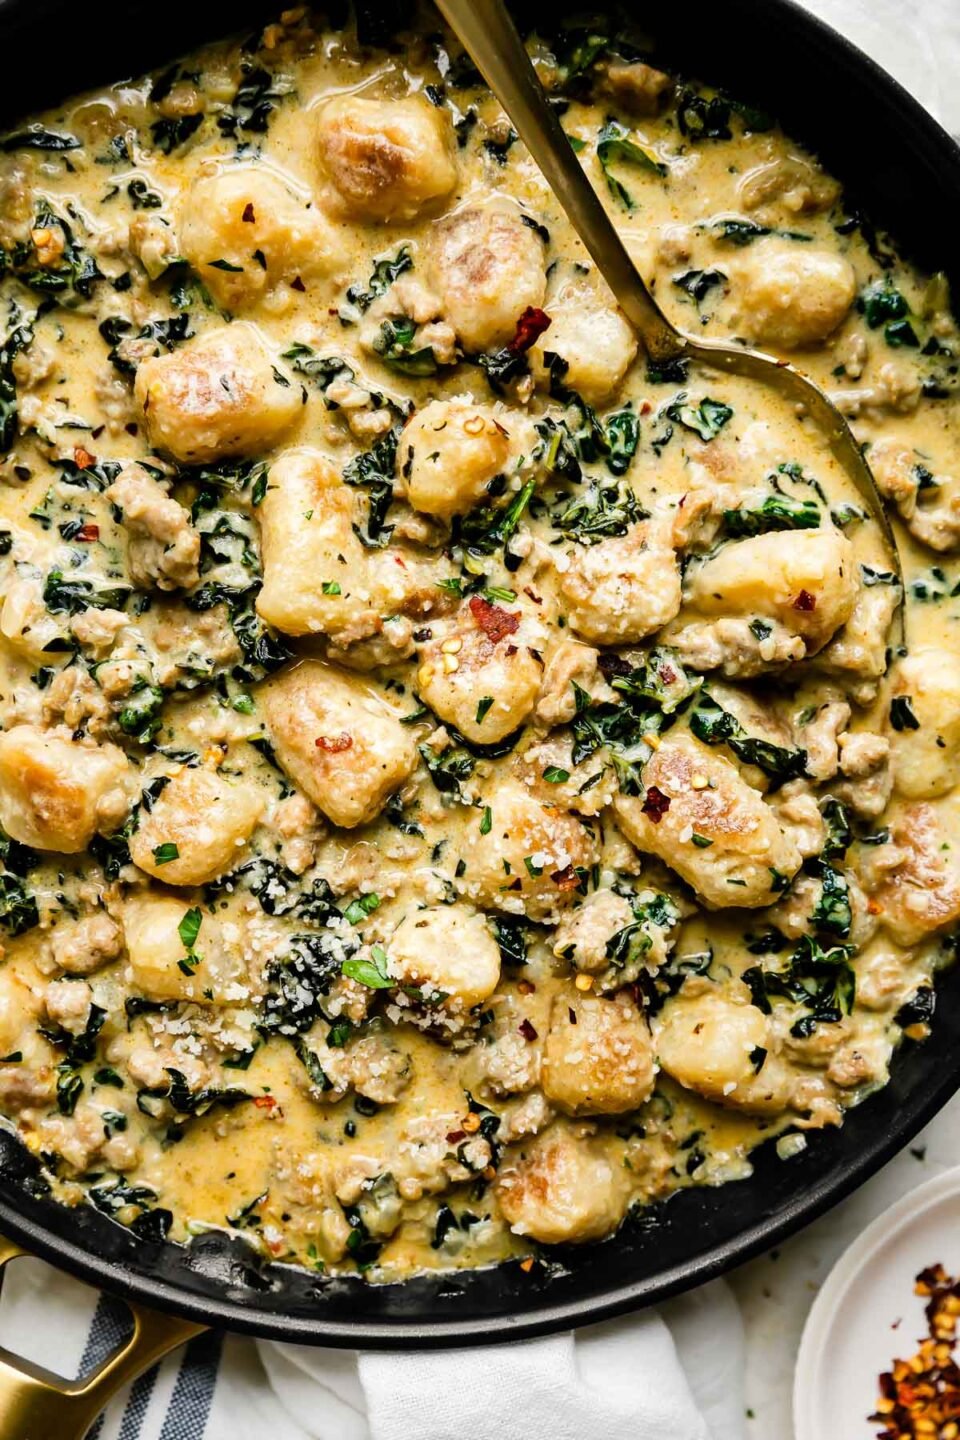 Sausage and gnocchi skillet fills a large black nonstick skillet that sits atop a creamy white textured surface. A gold spoon rests inside of the skillet and the skillet is surrounded by a small white plateful of crushed red pepper flakes and a white linen napkin with blue stripes.